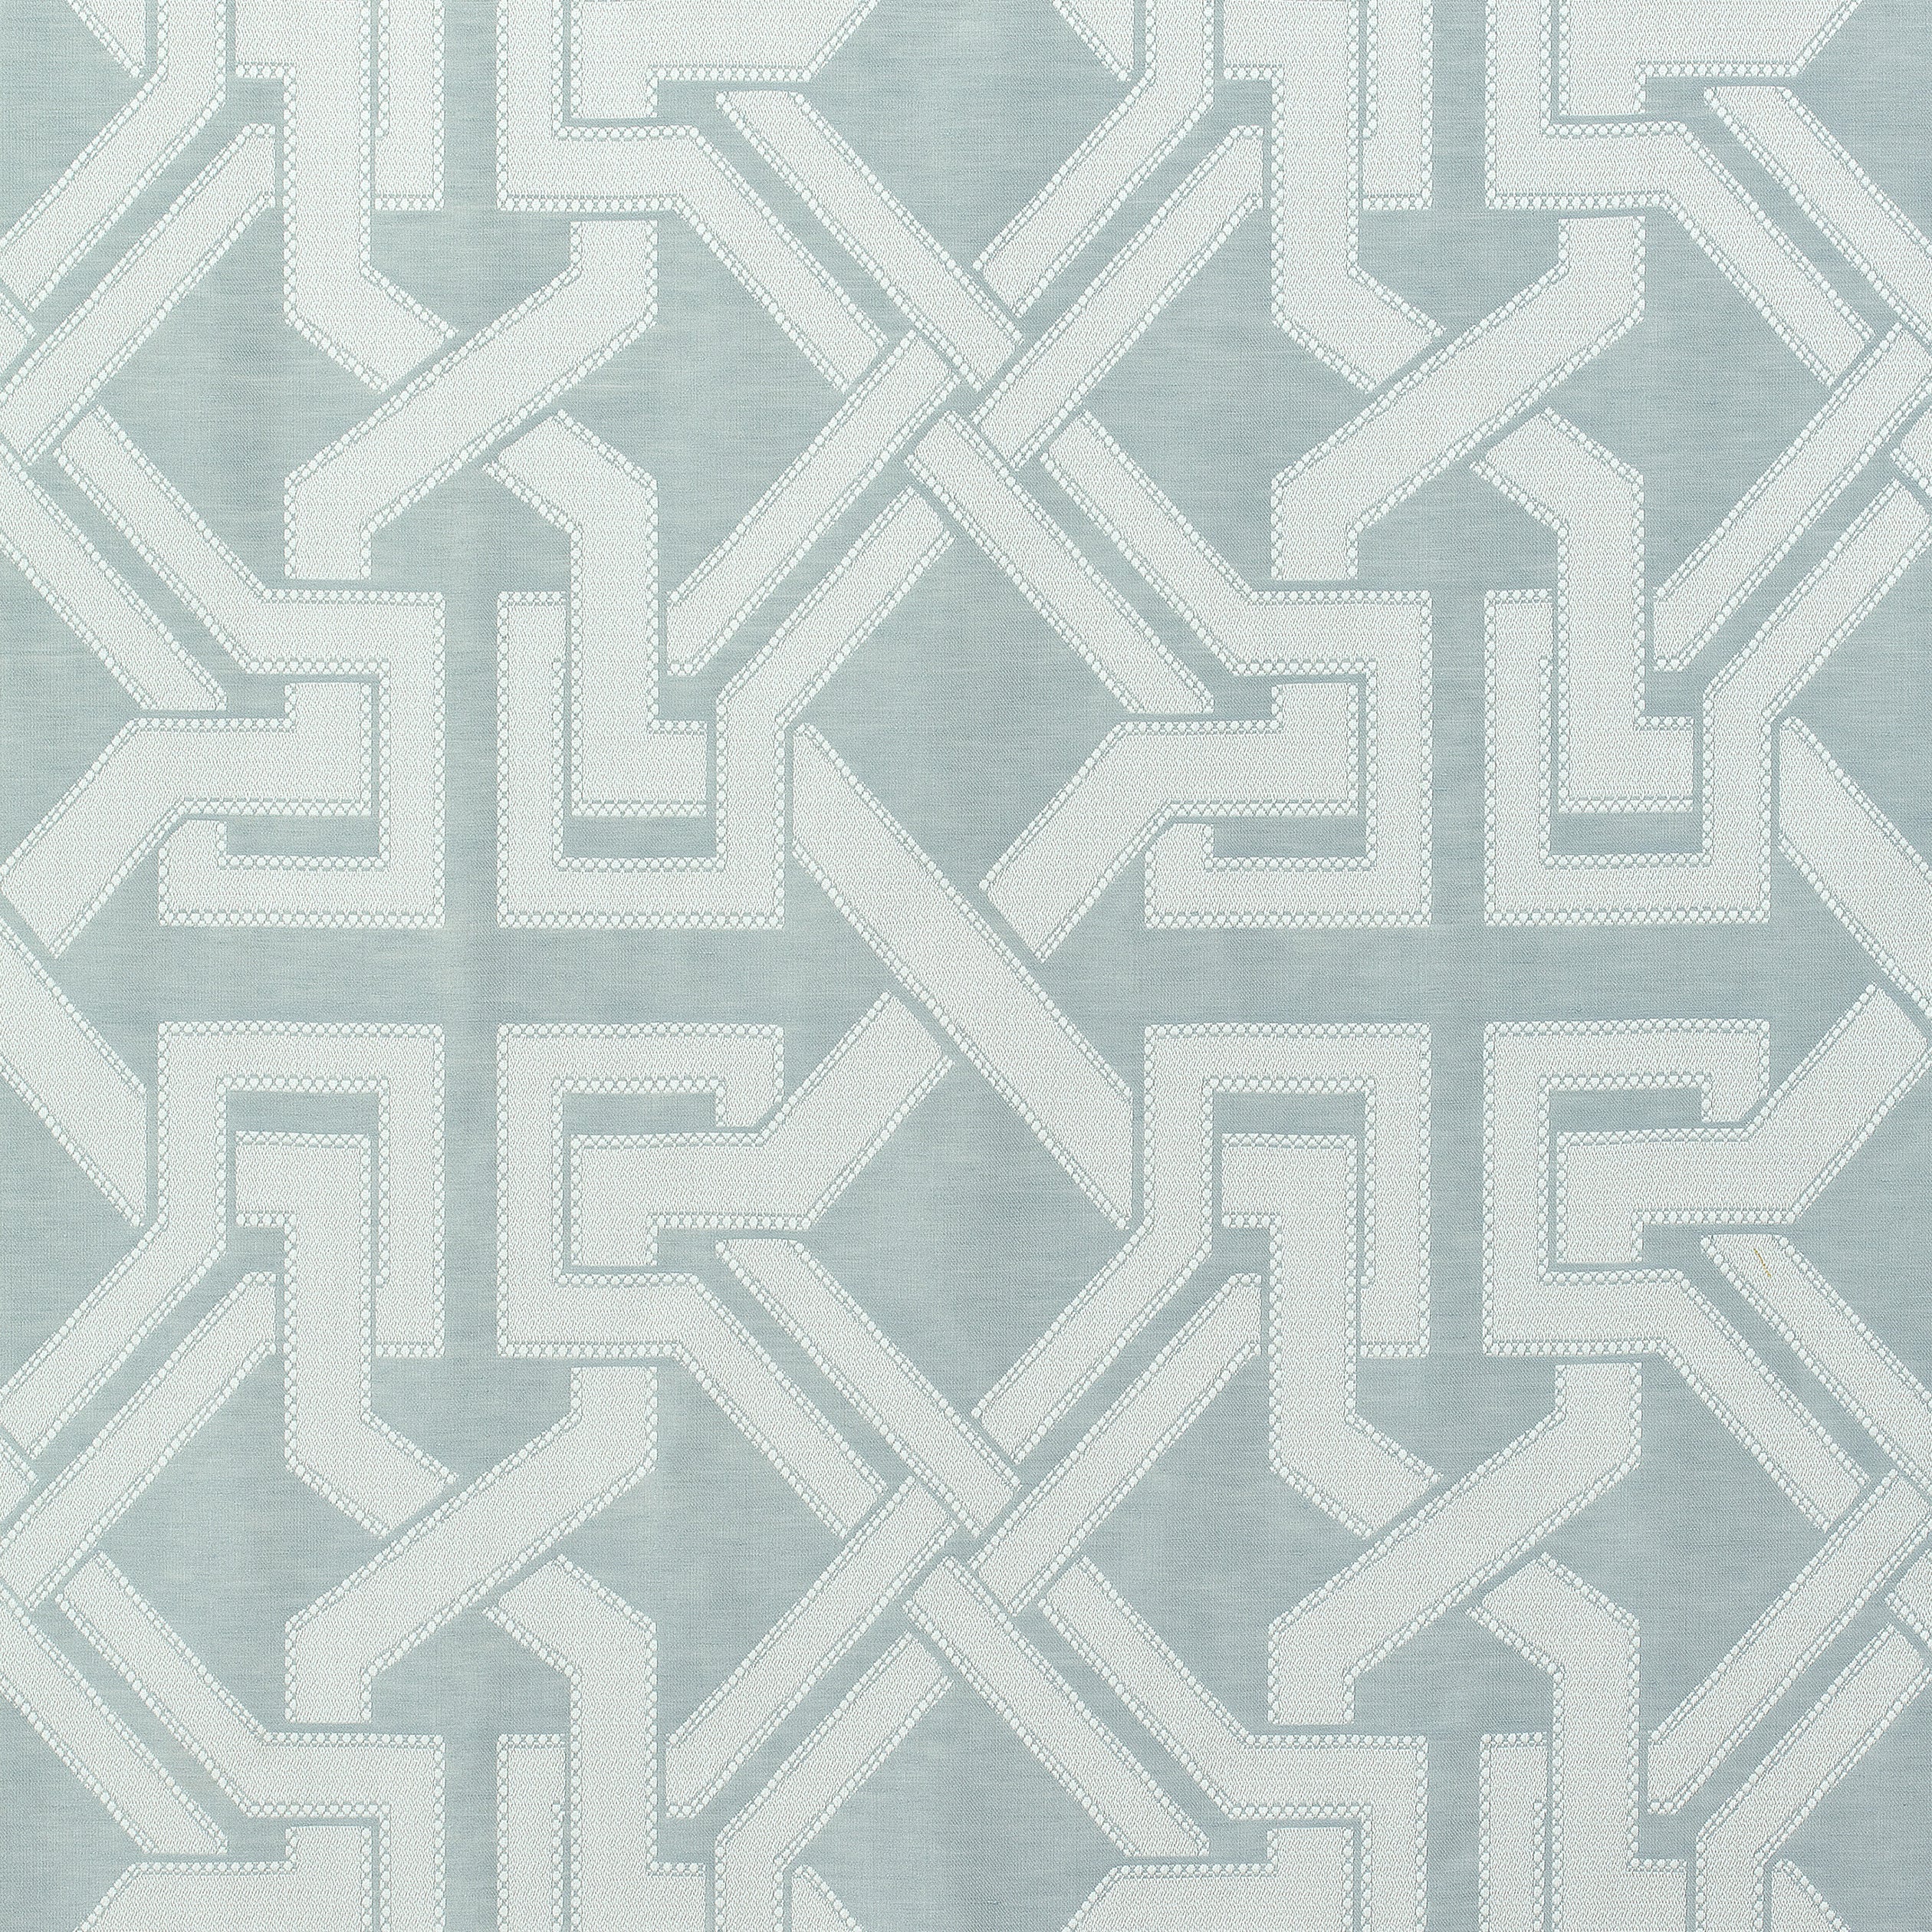 Benedetto fabric in aqua color - pattern number W772580 - by Thibaut in the Chestnut Hill collection